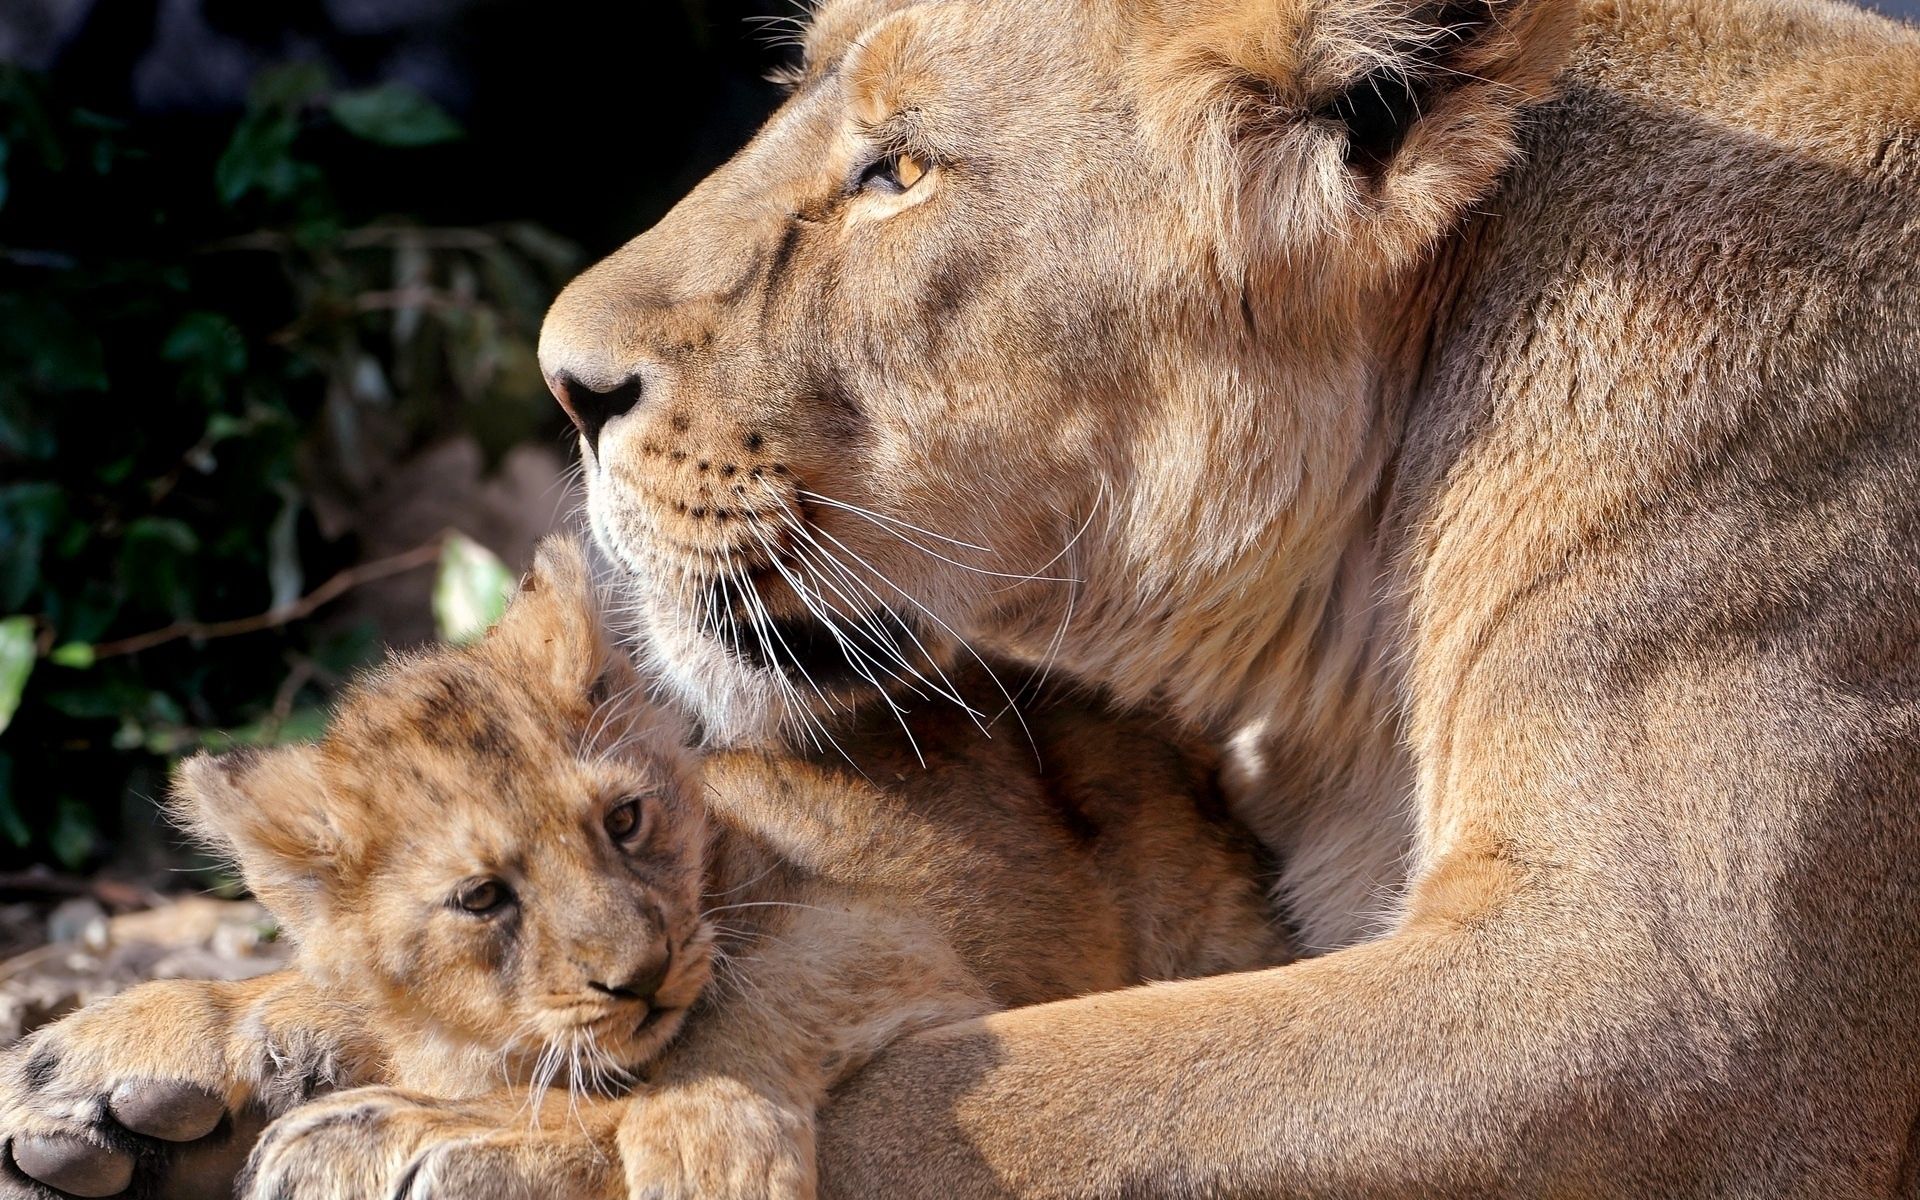 HD wallpaper care, animals, lions, young, joey